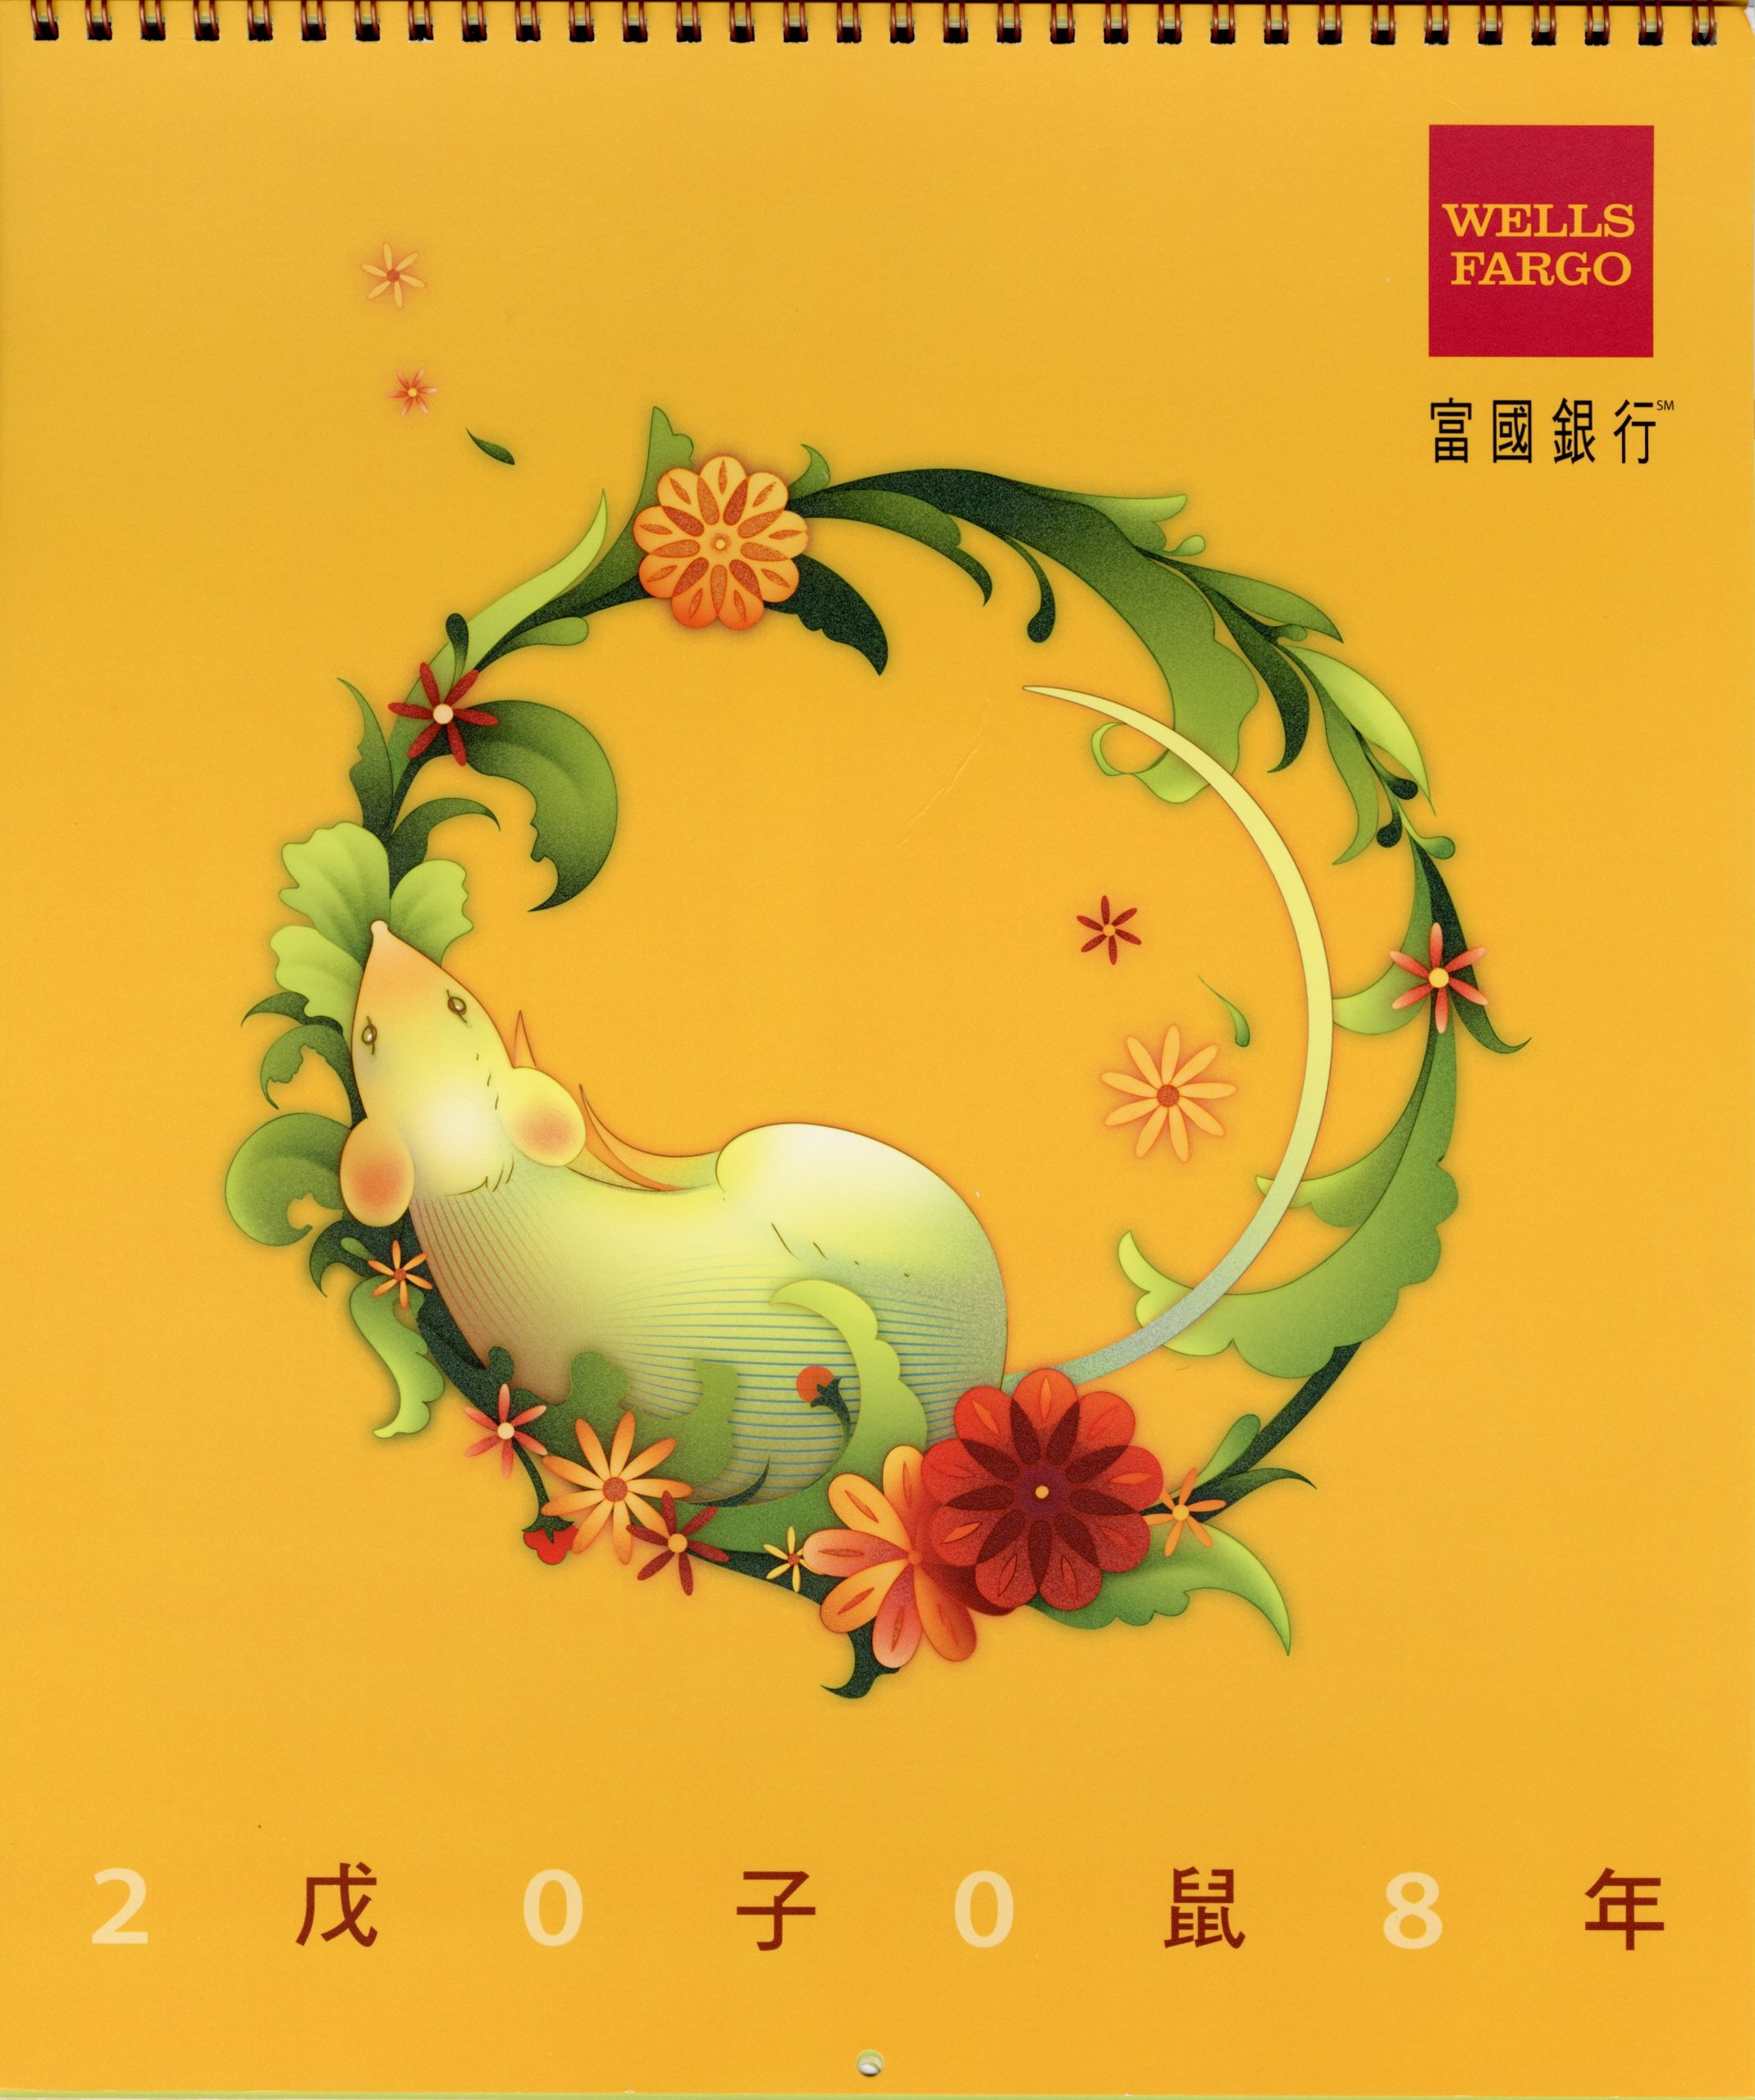 Cover of calendar. Illustration of a rat in a circle of flowers.